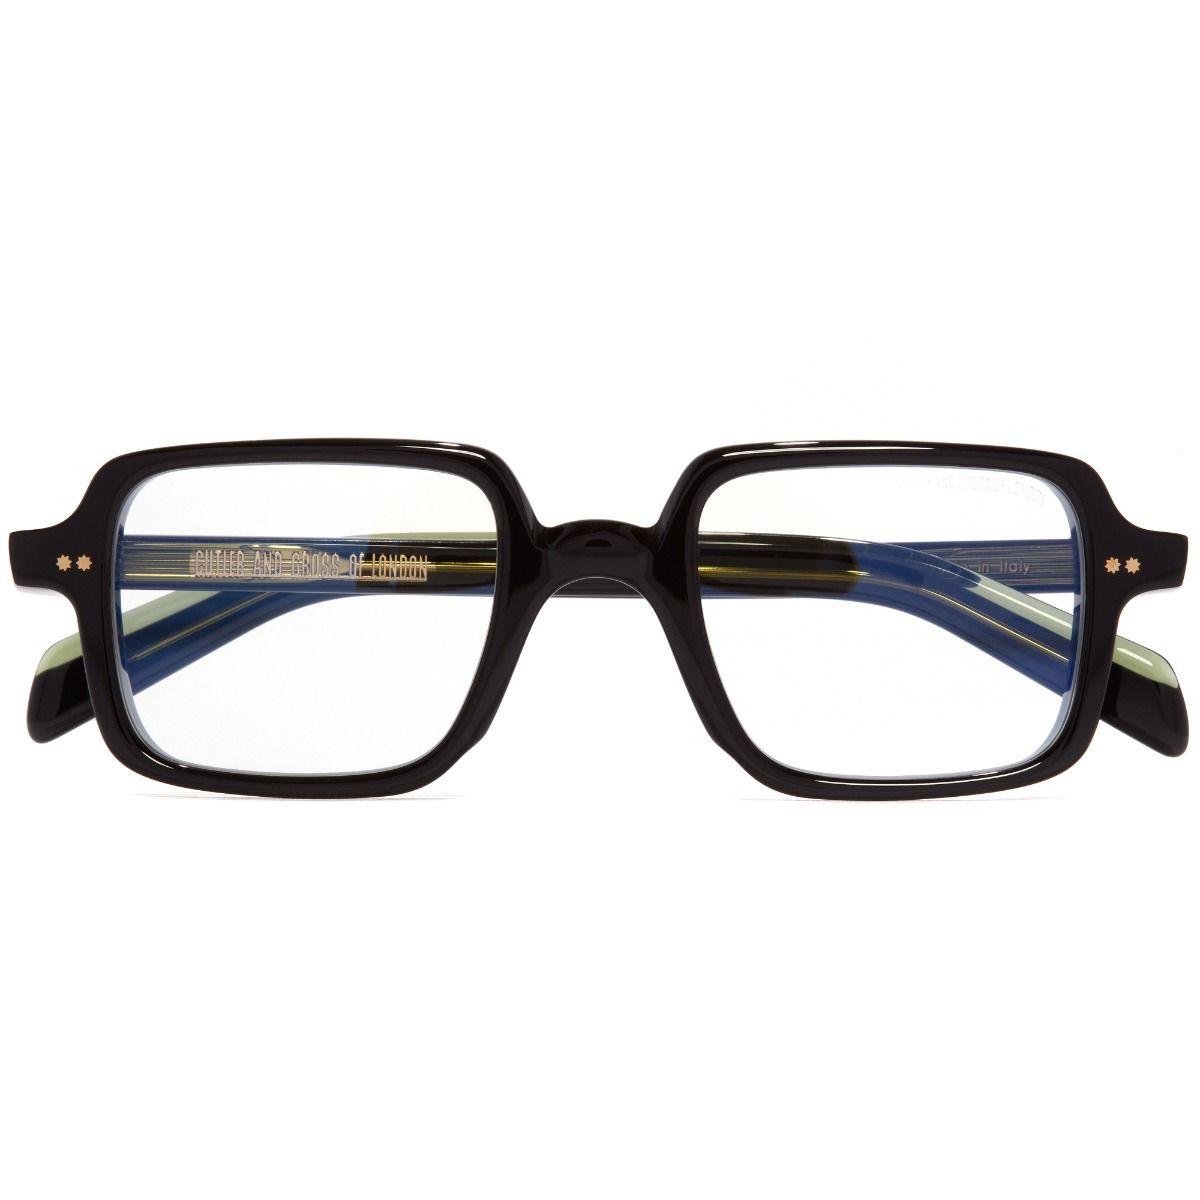 GR02 Rectangle Optical Glasses - Black by Cutler and Gross